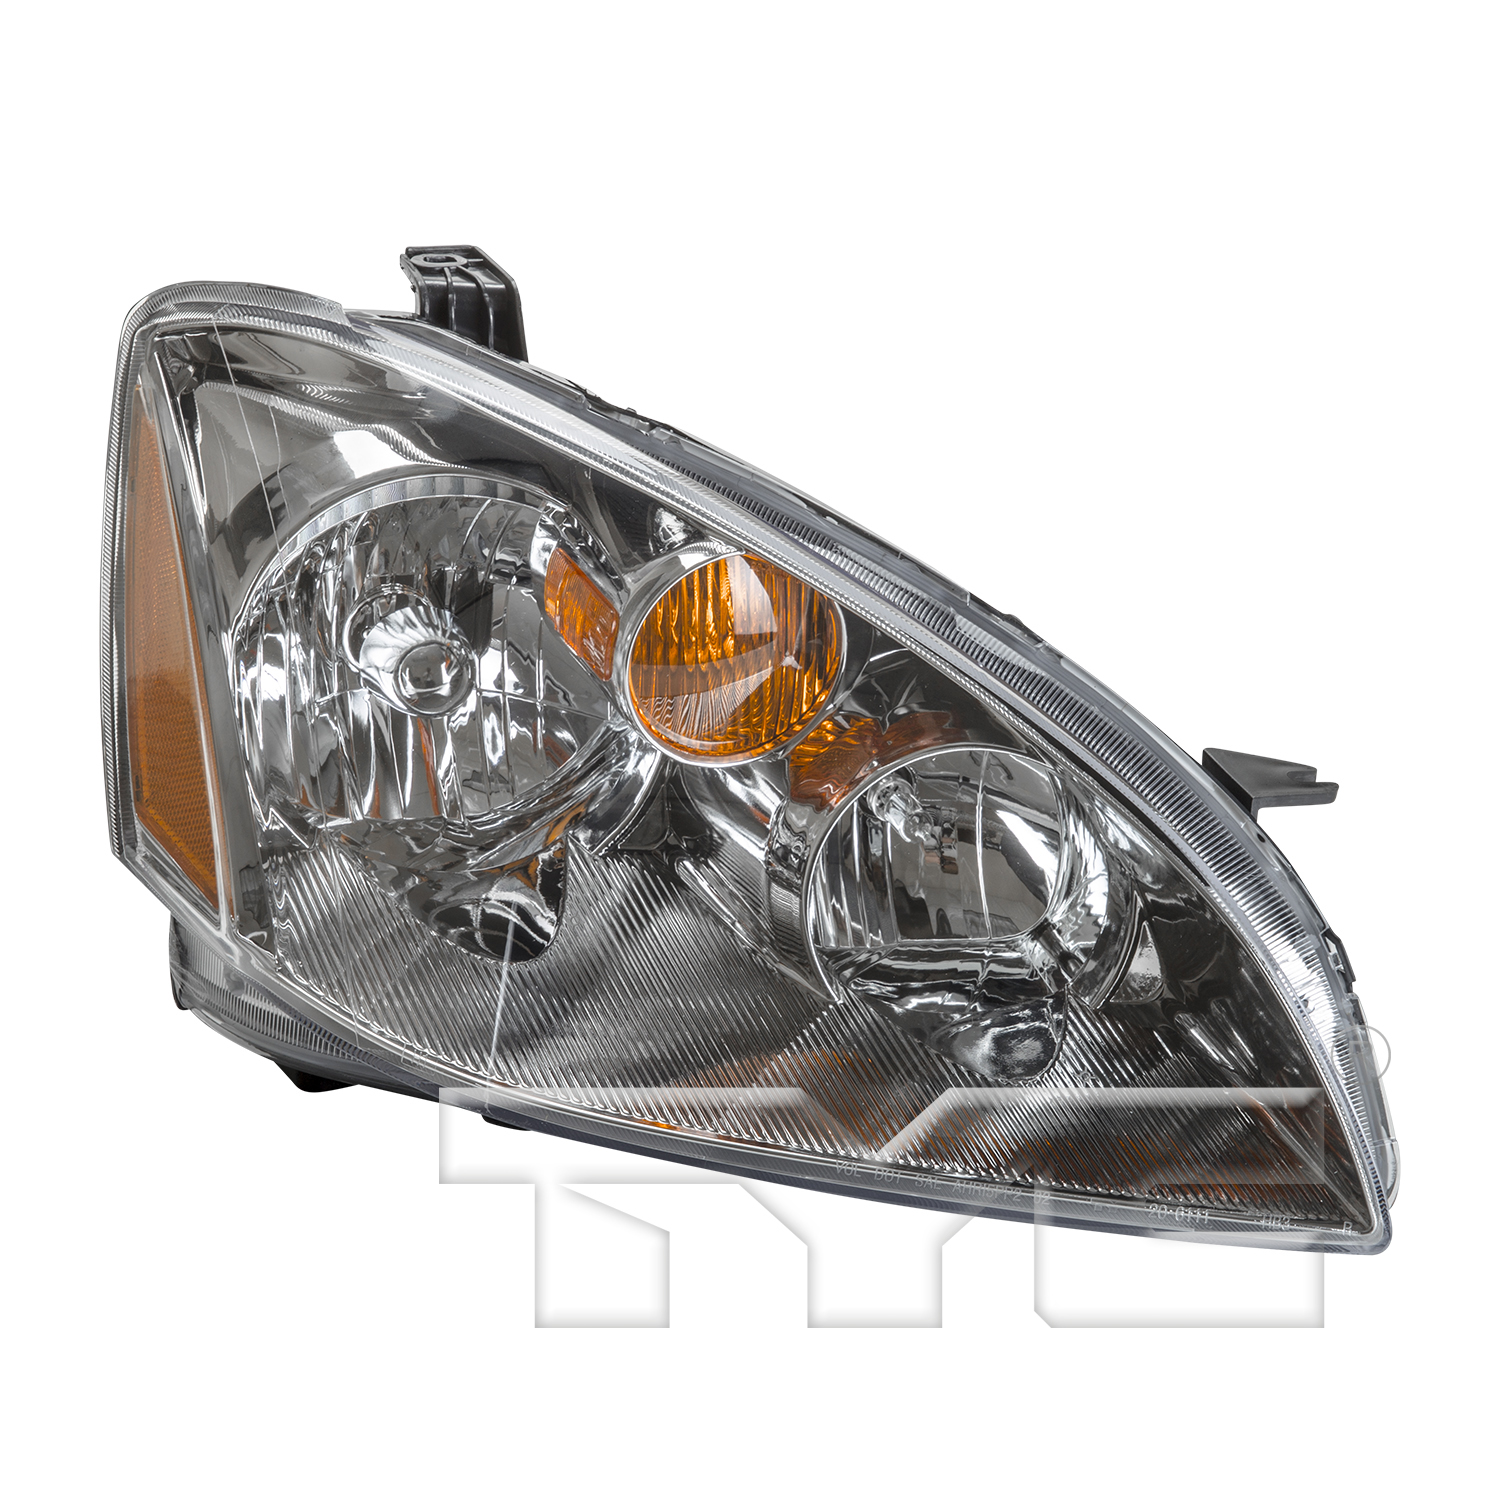 Aftermarket HEADLIGHTS for NISSAN - ALTIMA, ALTIMA,02-04,RT Headlamp assy composite